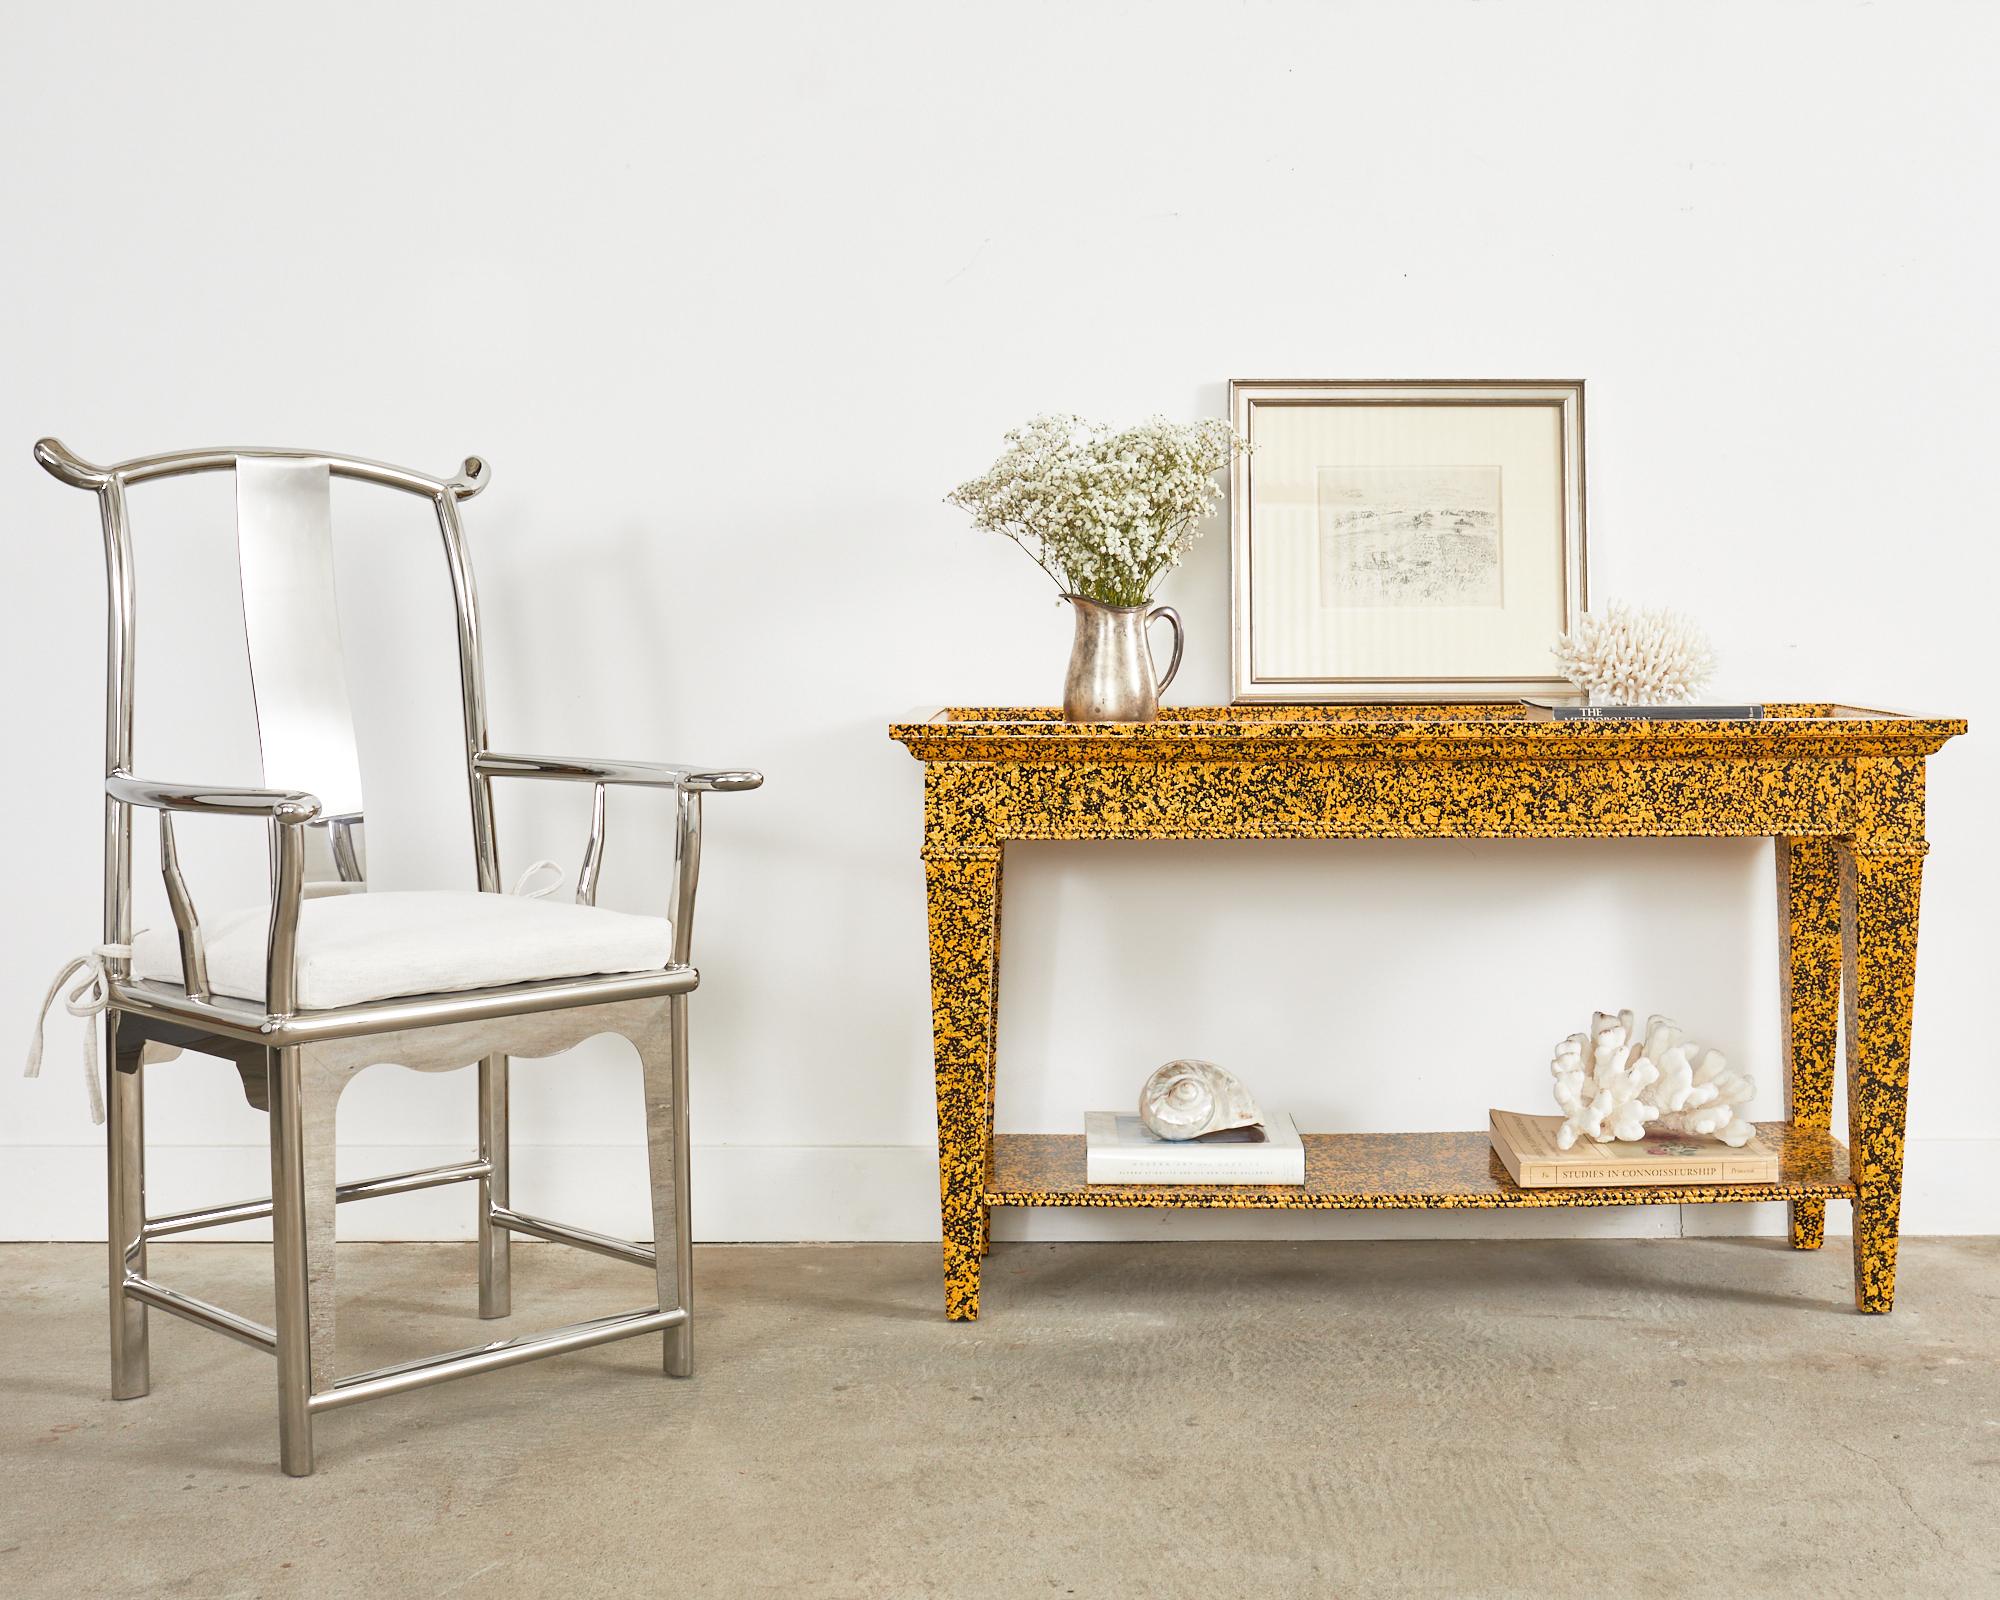 Whimsical lacquer speckled console table or sofa table by artist Ira Yeager (American 1938-2022). The two-tier table features a brilliant mustard yellow lacquered finish over a black ground painstakingly painted by Ira. The speckled finish has a